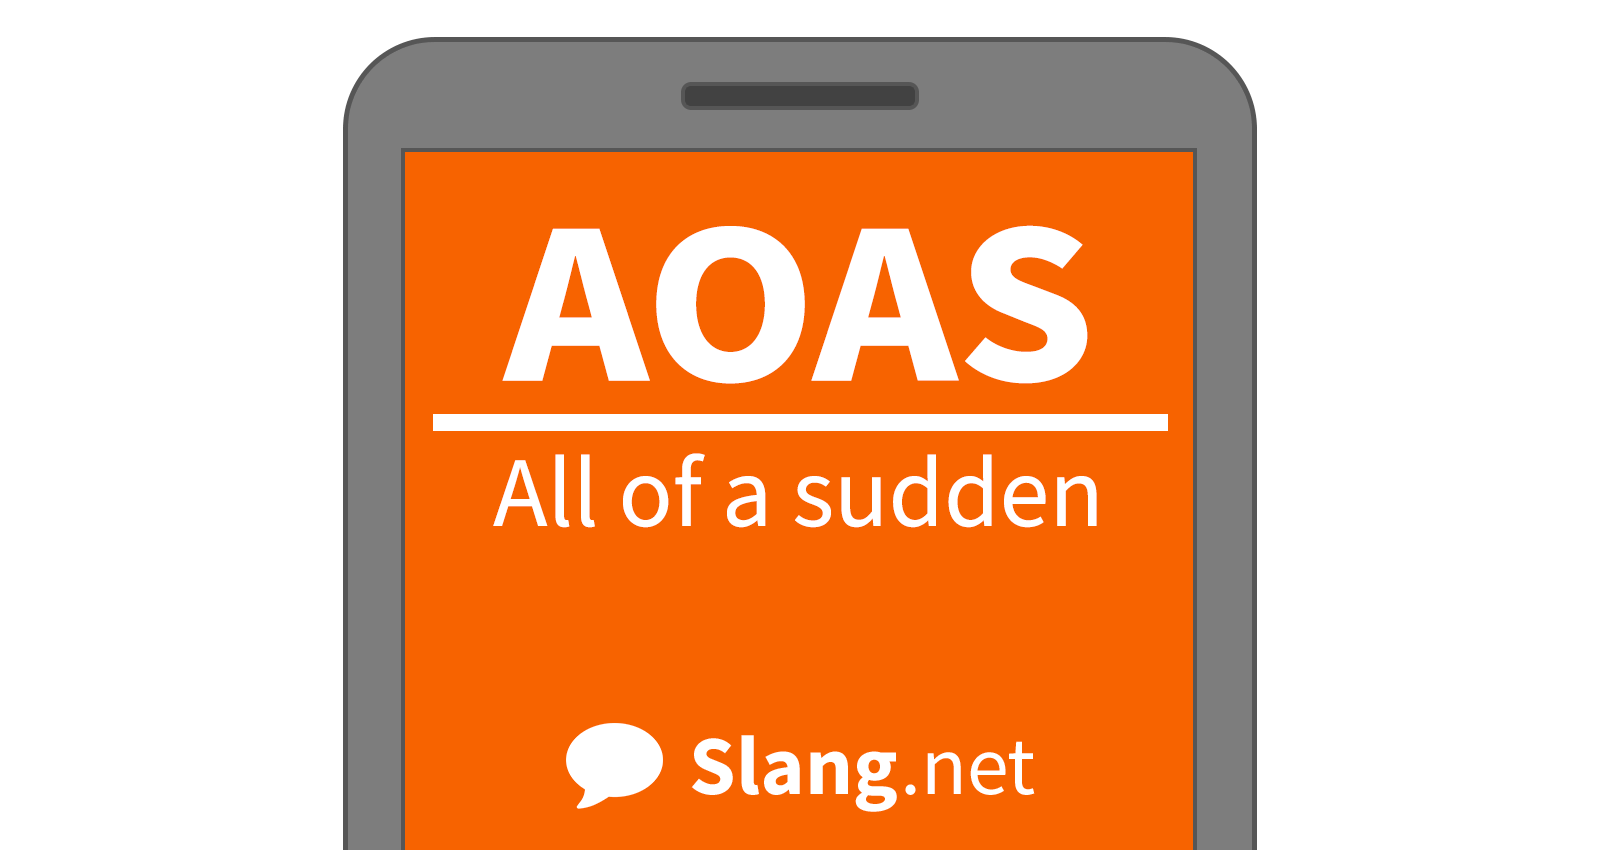 AOAS is short for &quot;all of a sudden&quot;